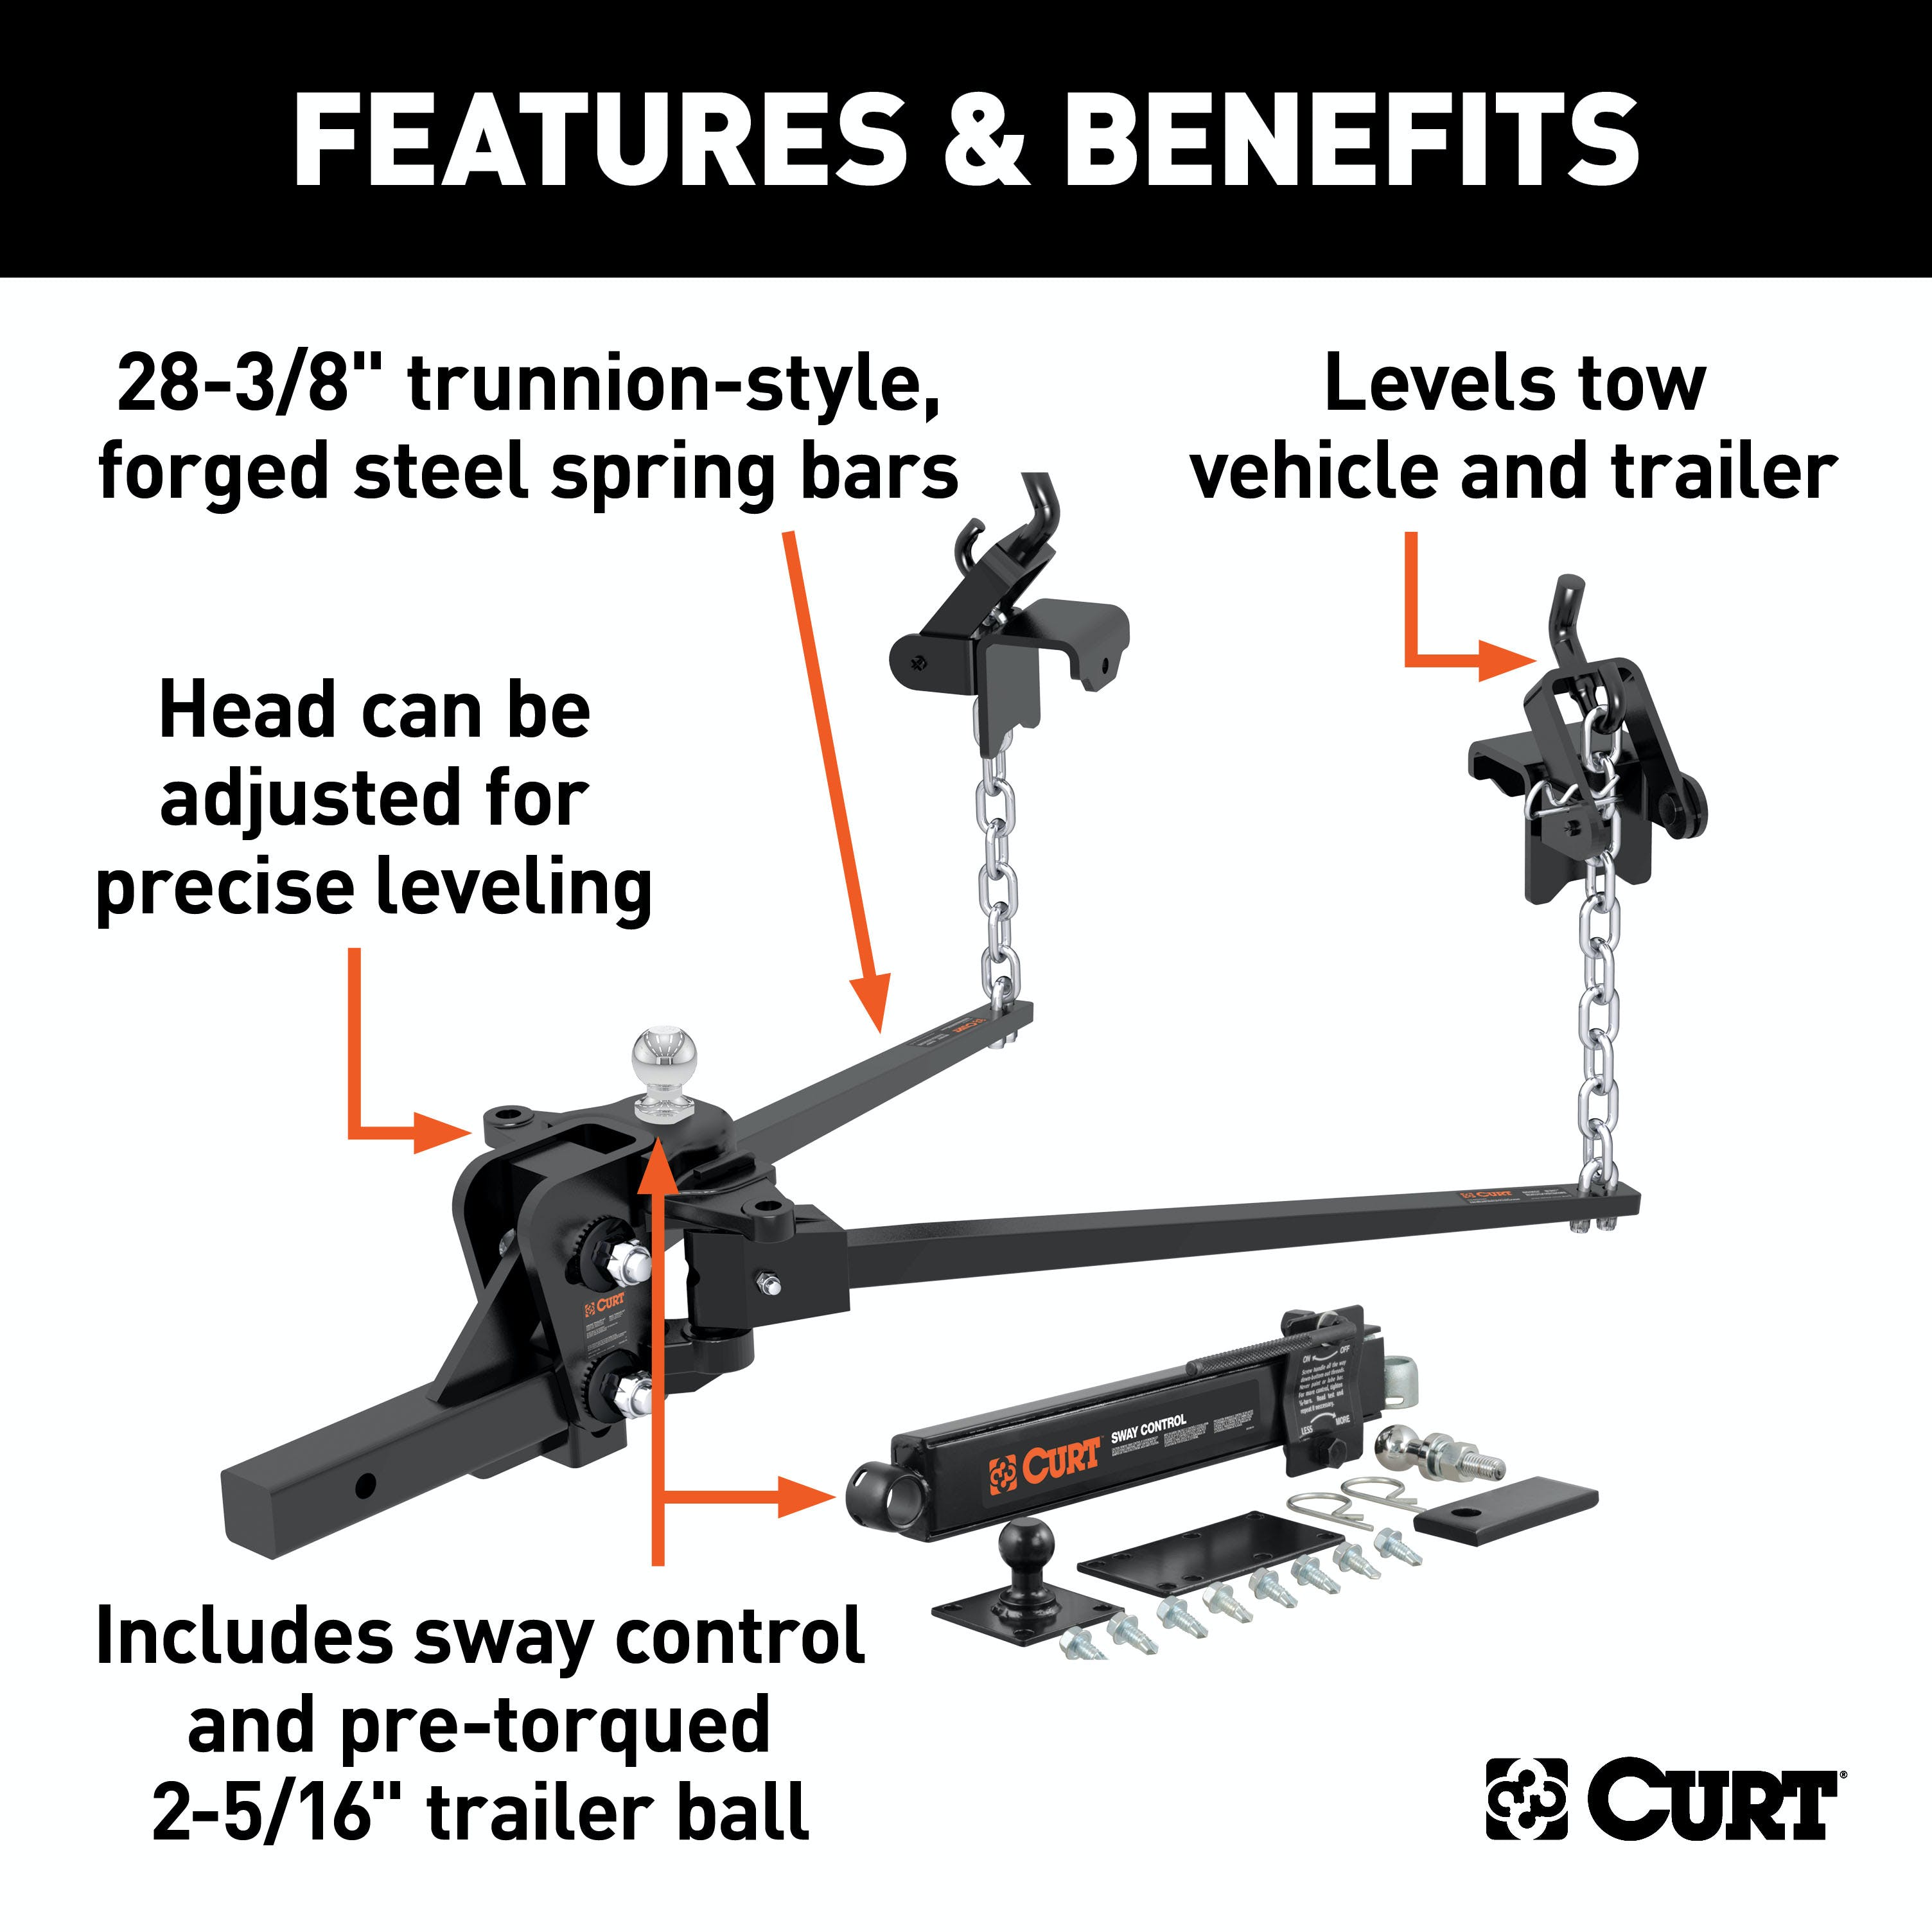 CURT 17322 Short Trunnion Bar Weight Distribution Hitch with Sway Control (8-10K, 28-3/8)